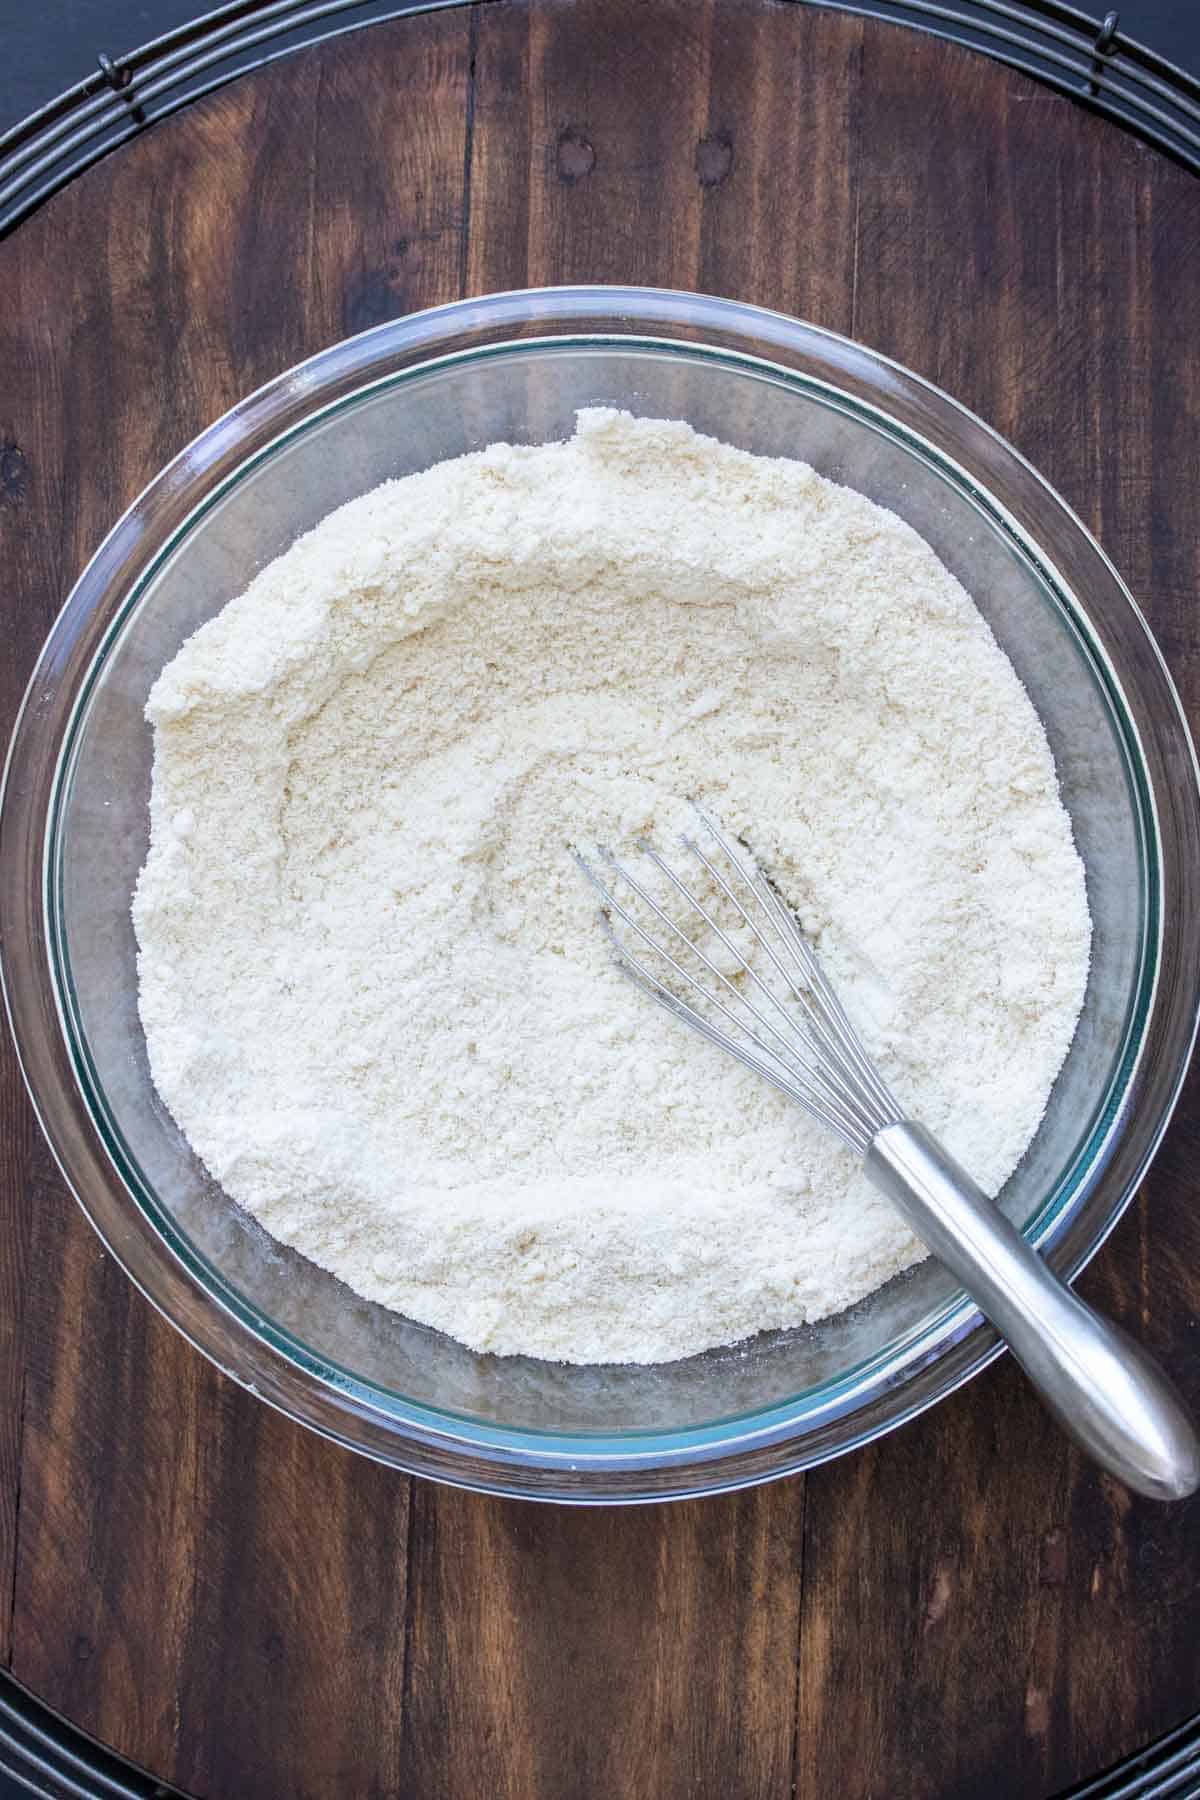 Whisk mixing flour in a glass bowl